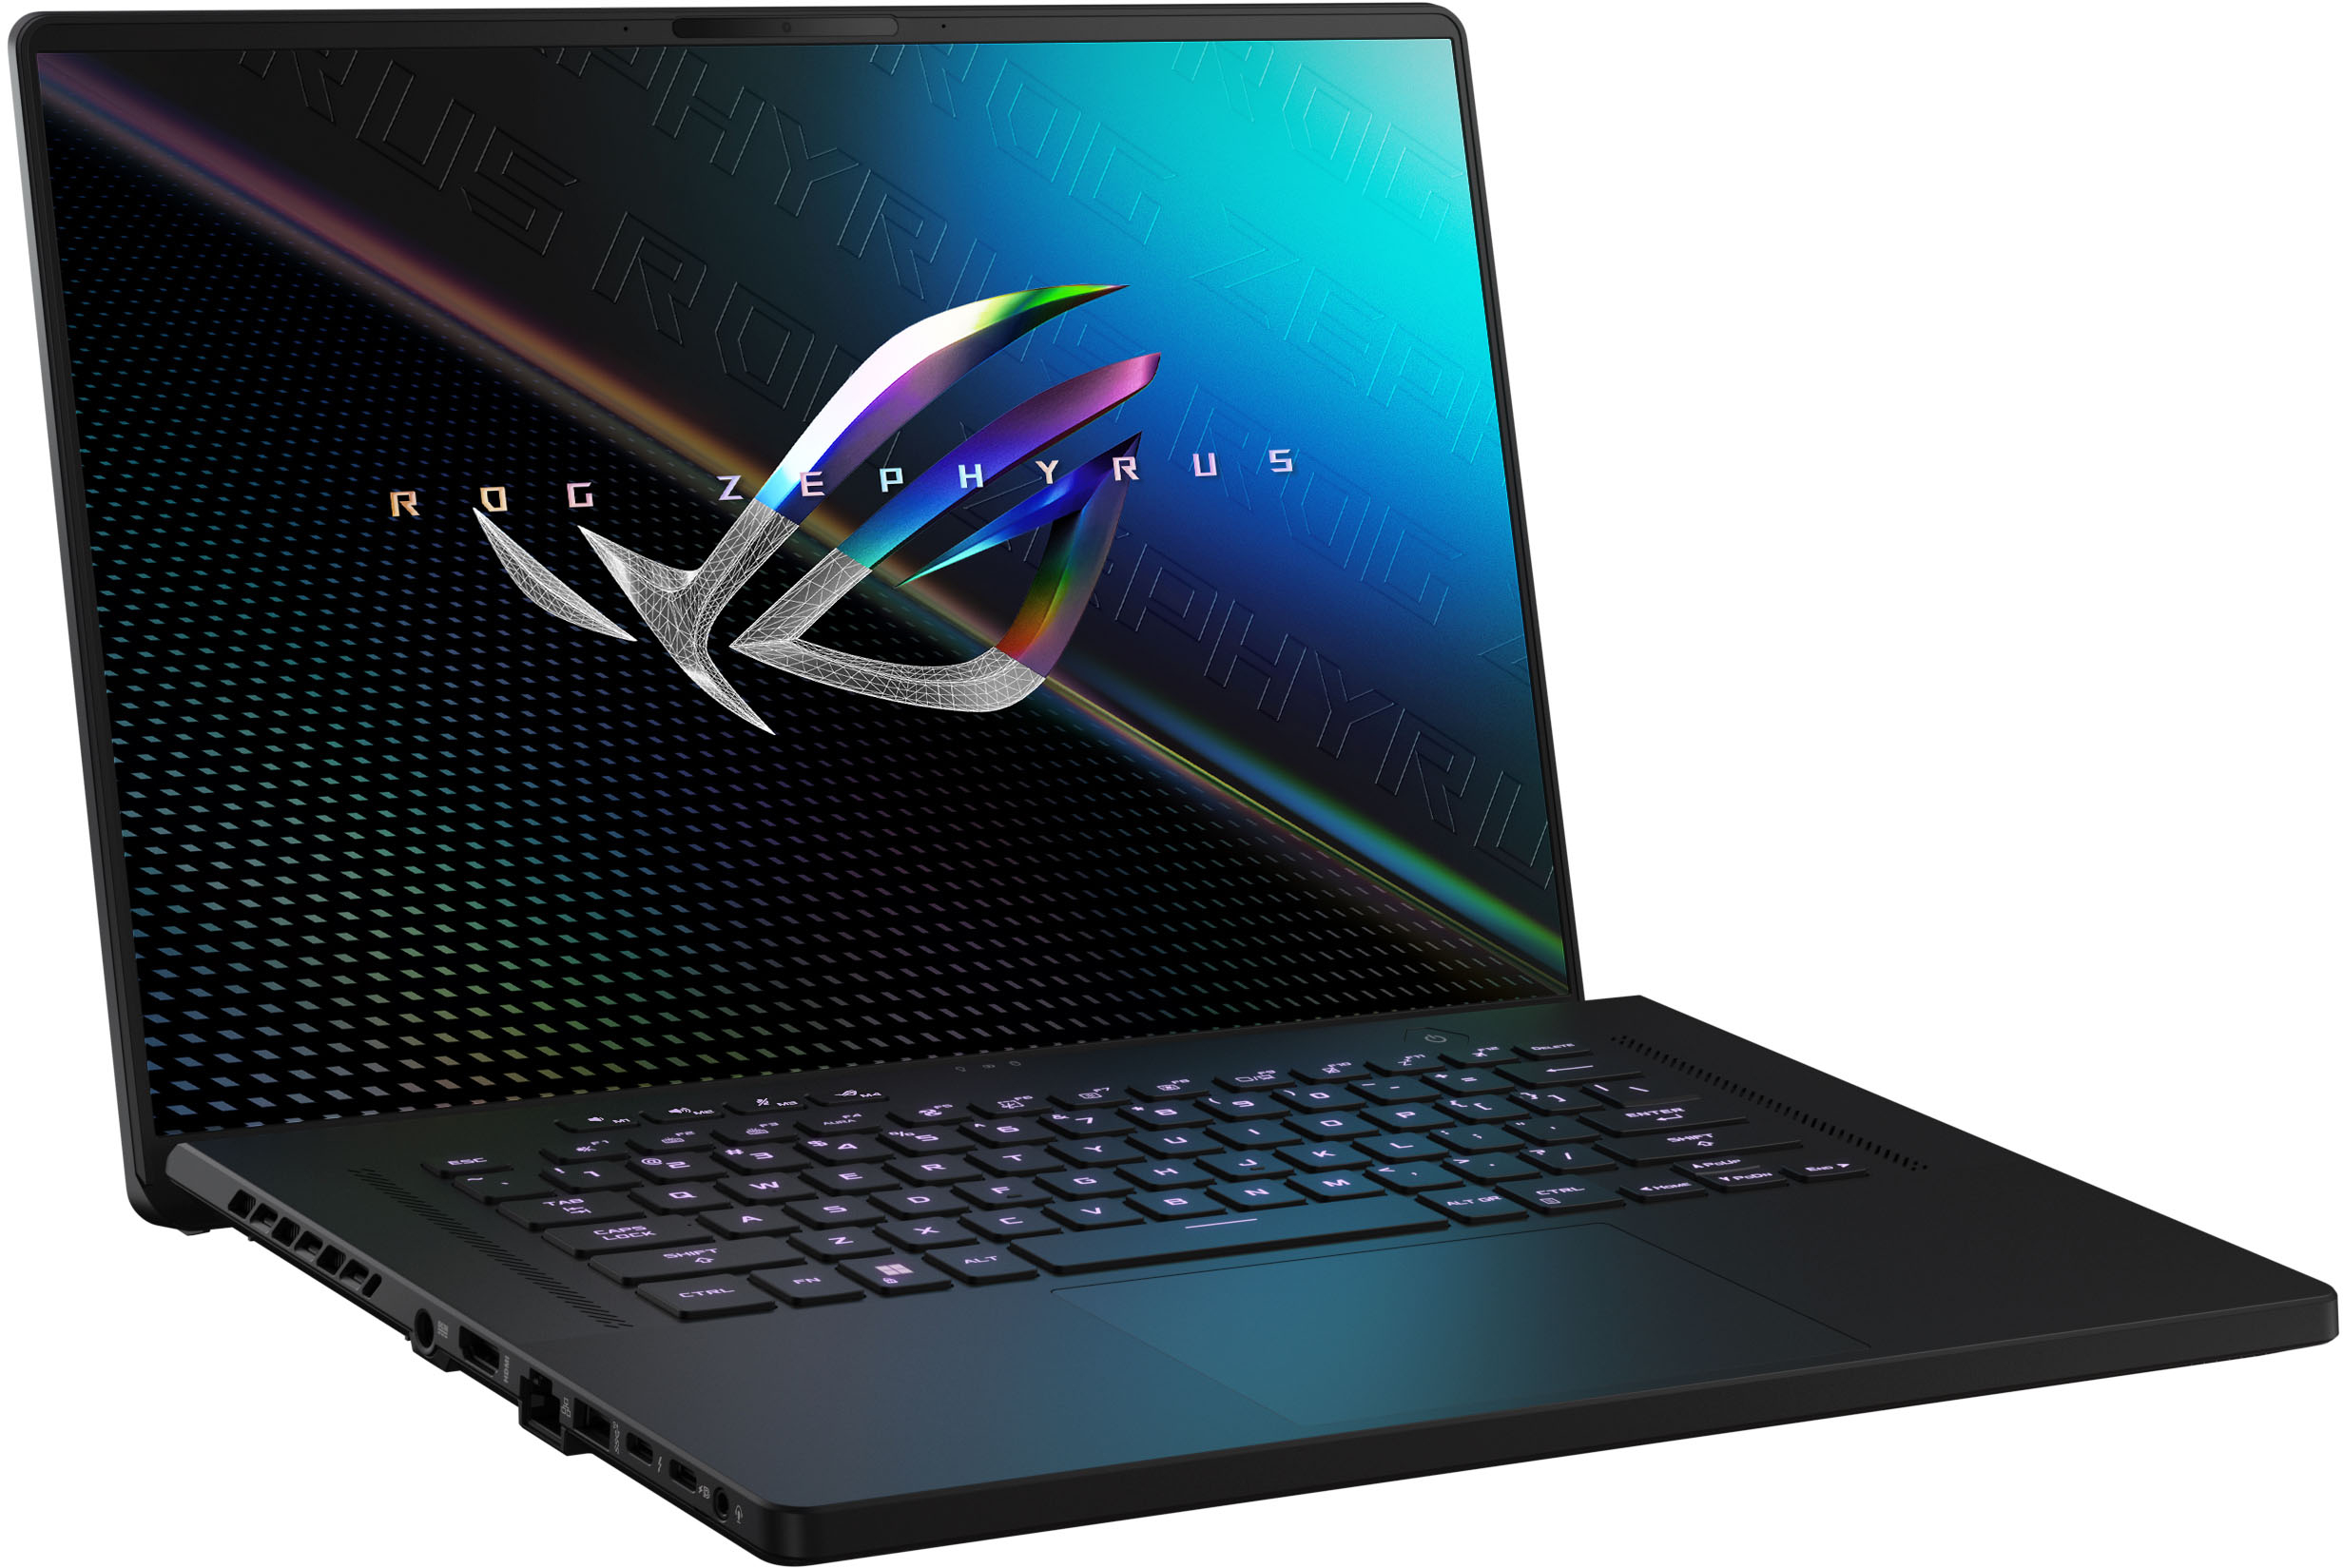 ASUS ROG Zephyrus M16 Gaming Laptop (Intel i7-12700H 14-Core, 16.0in 165Hz  Wide UXGA (1920x1200), NVIDIA GeForce RTX 3060, Win 11 Home) with TUF  Gaming M3 TUF Gaming P3